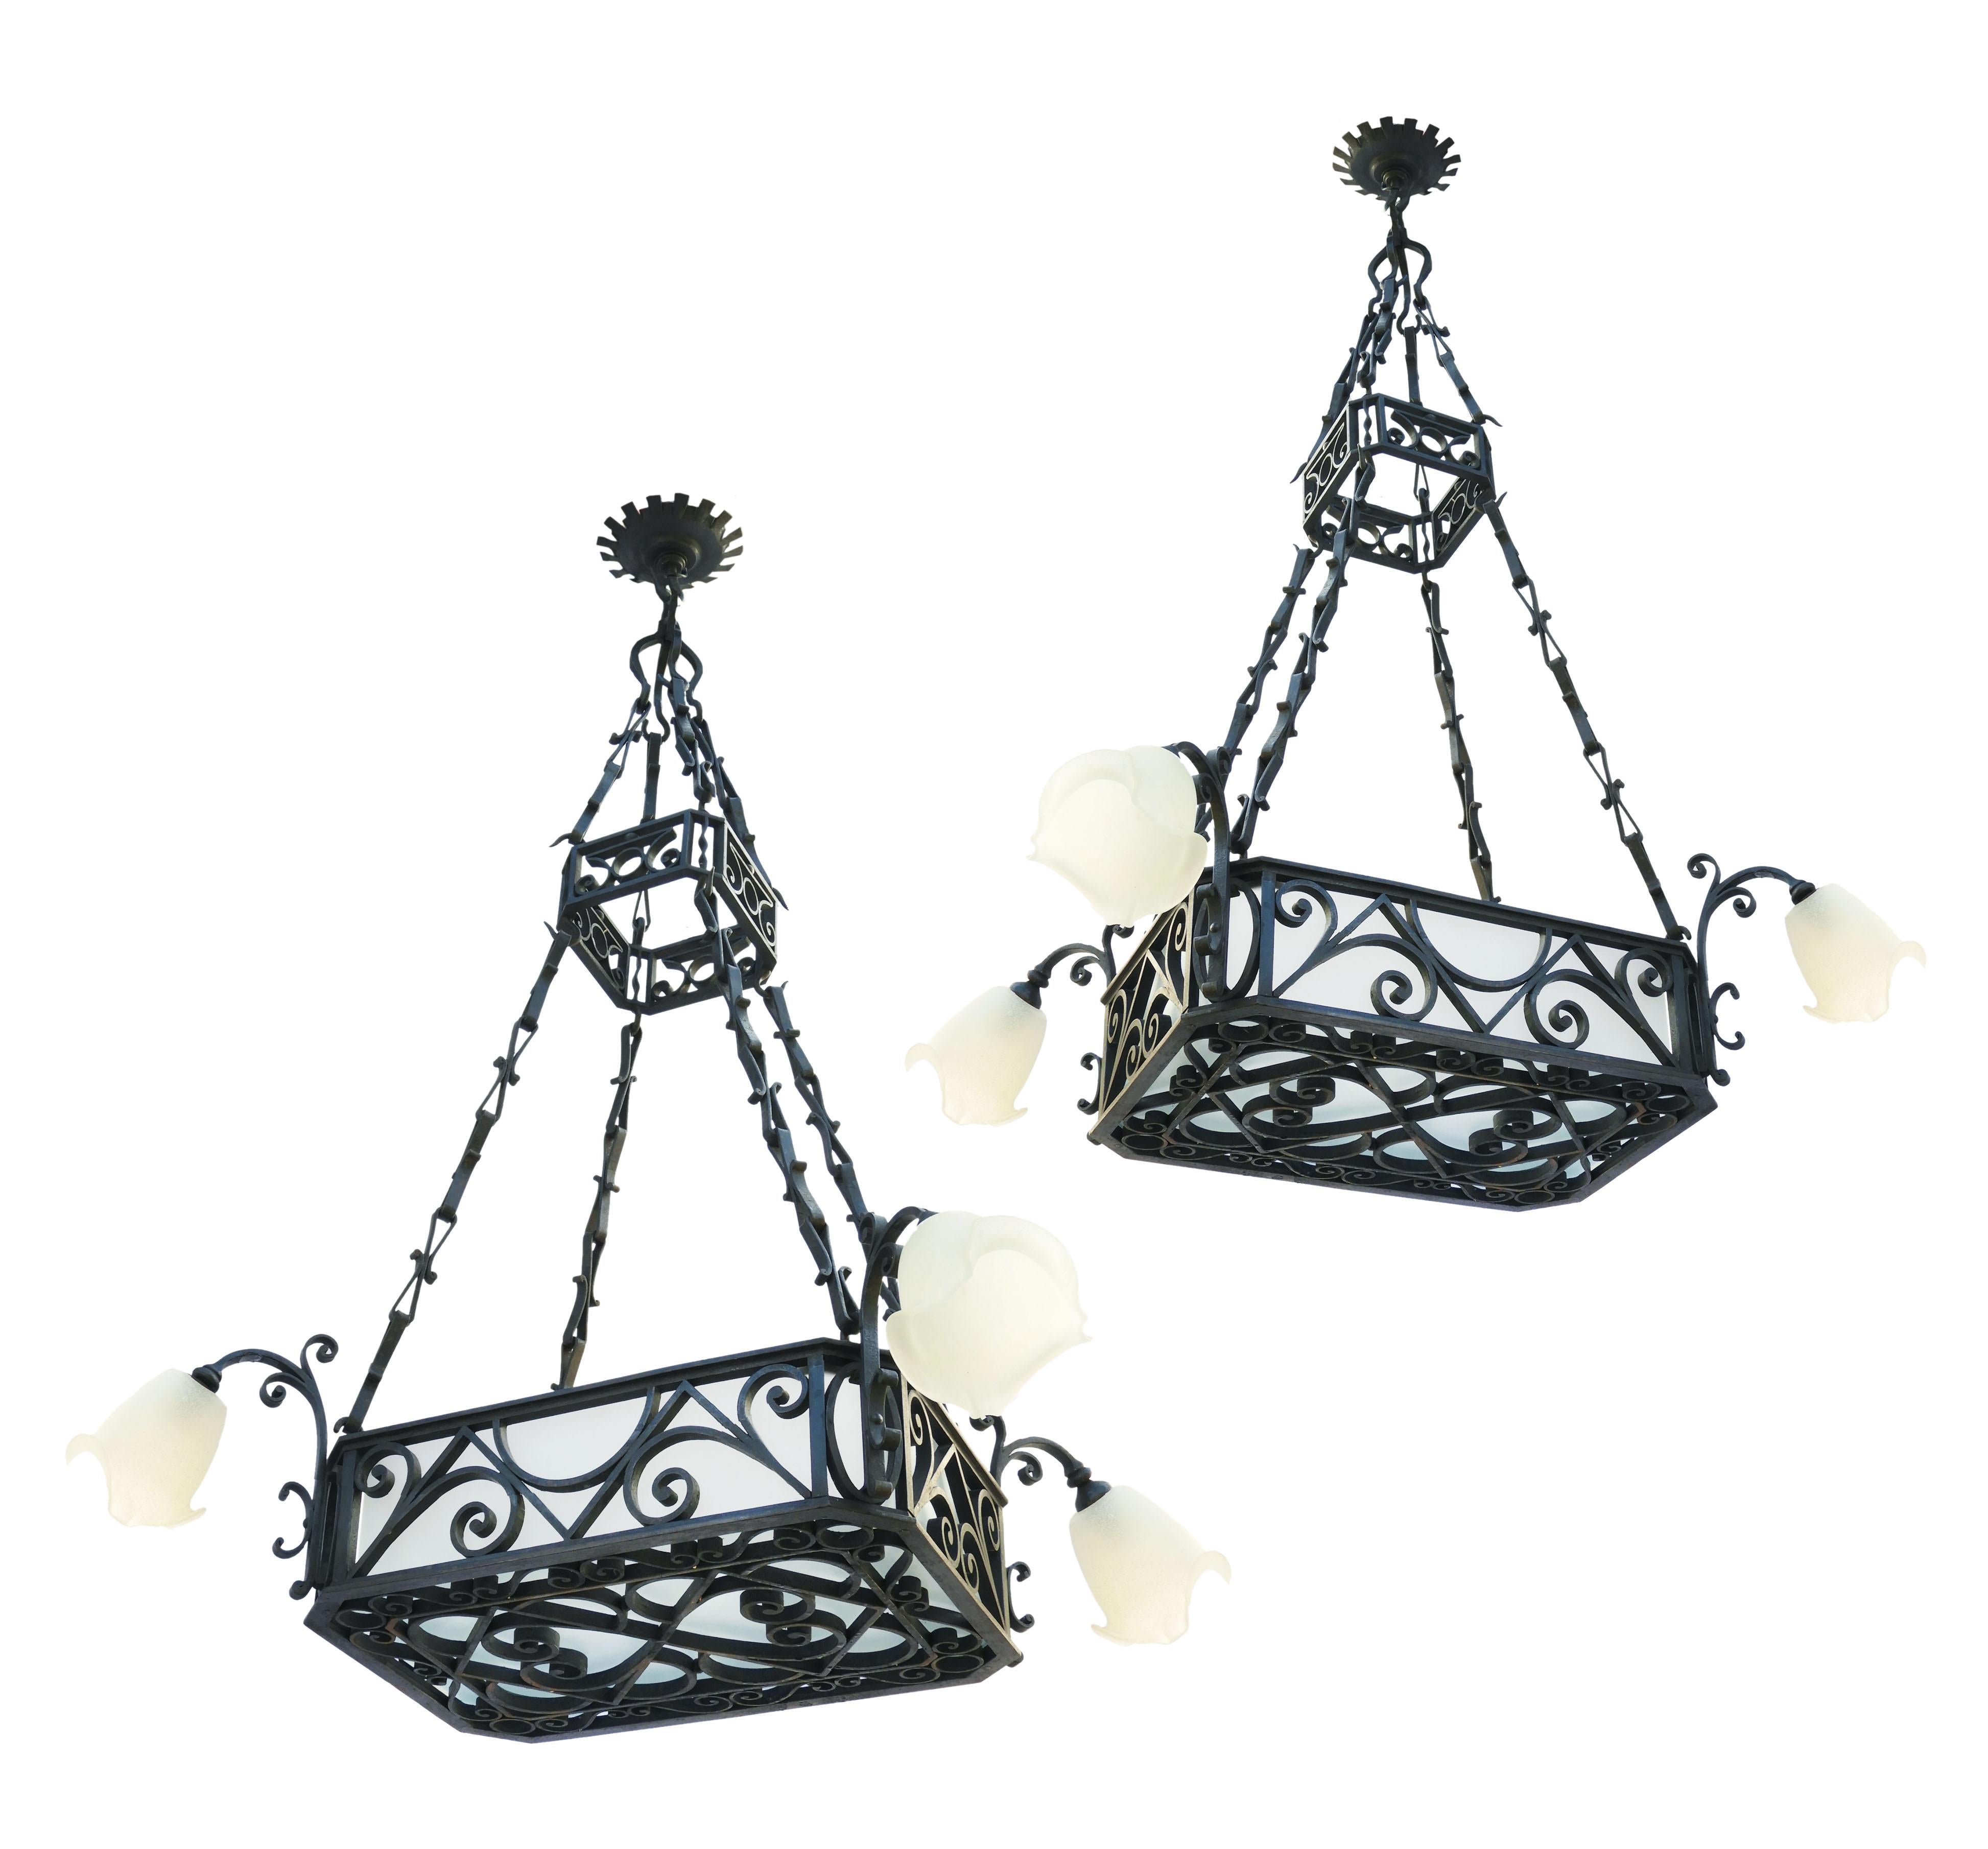 Large French wrought iron and frosted glass chandeliers, circa 1900. A stunning rare find. These originally came from a restaurant in Biarritz, popular during the Belle Époque era. These heavy, Artisan made chandeliers each have a central basket